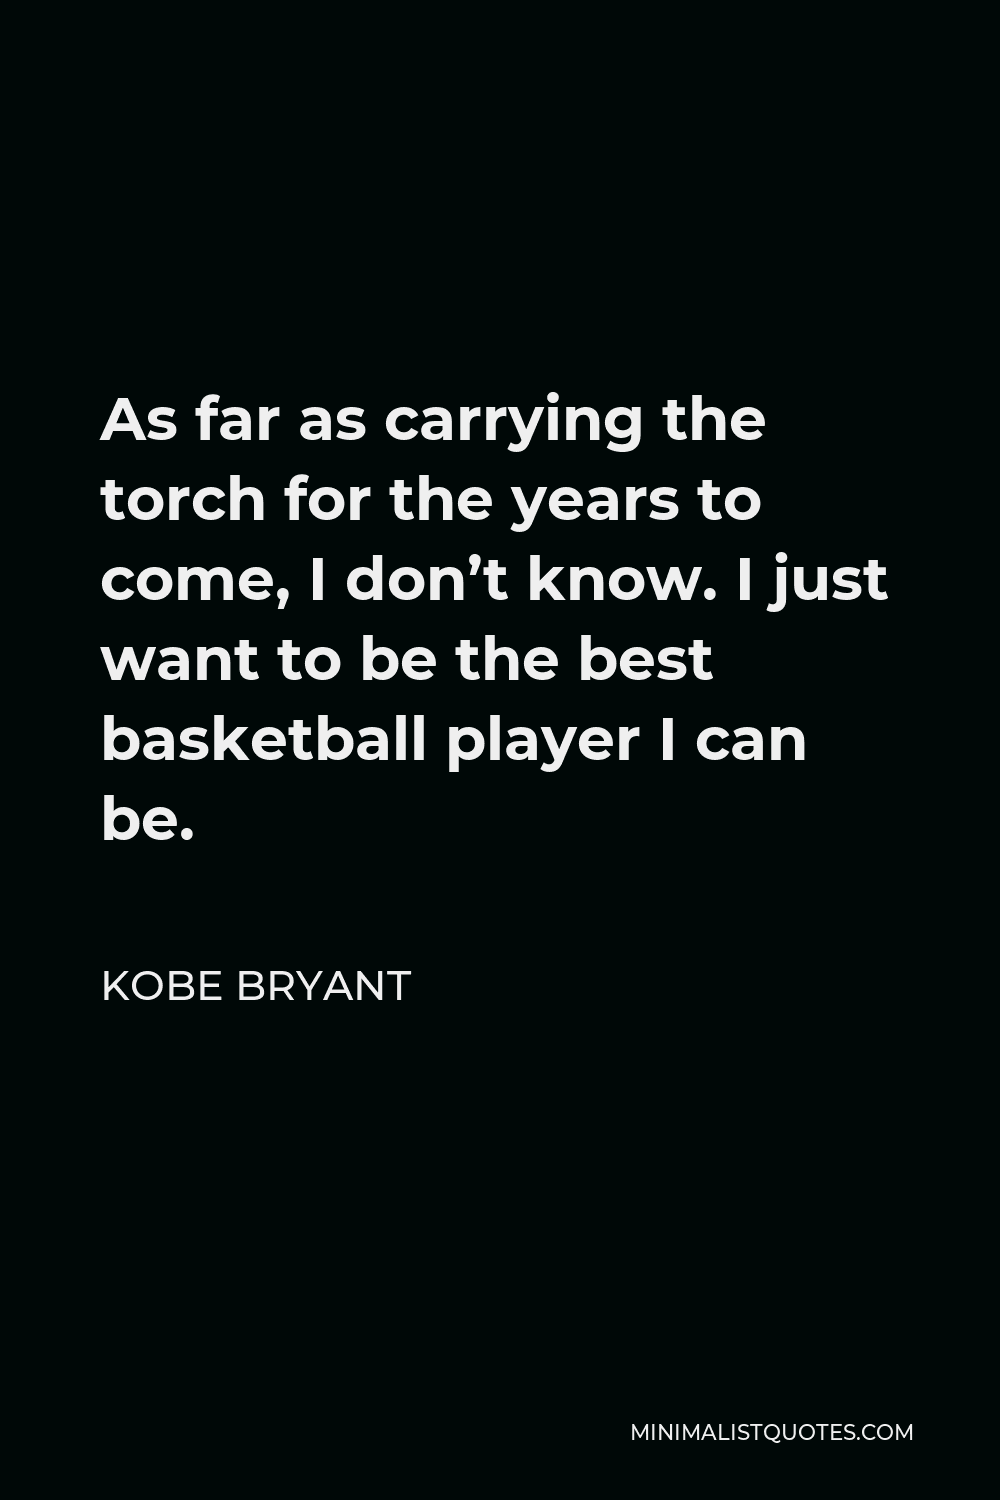 Kobe Bryant Quote - As far as carrying the torch for the years to come, I don’t know. I just want to be the best basketball player I can be.